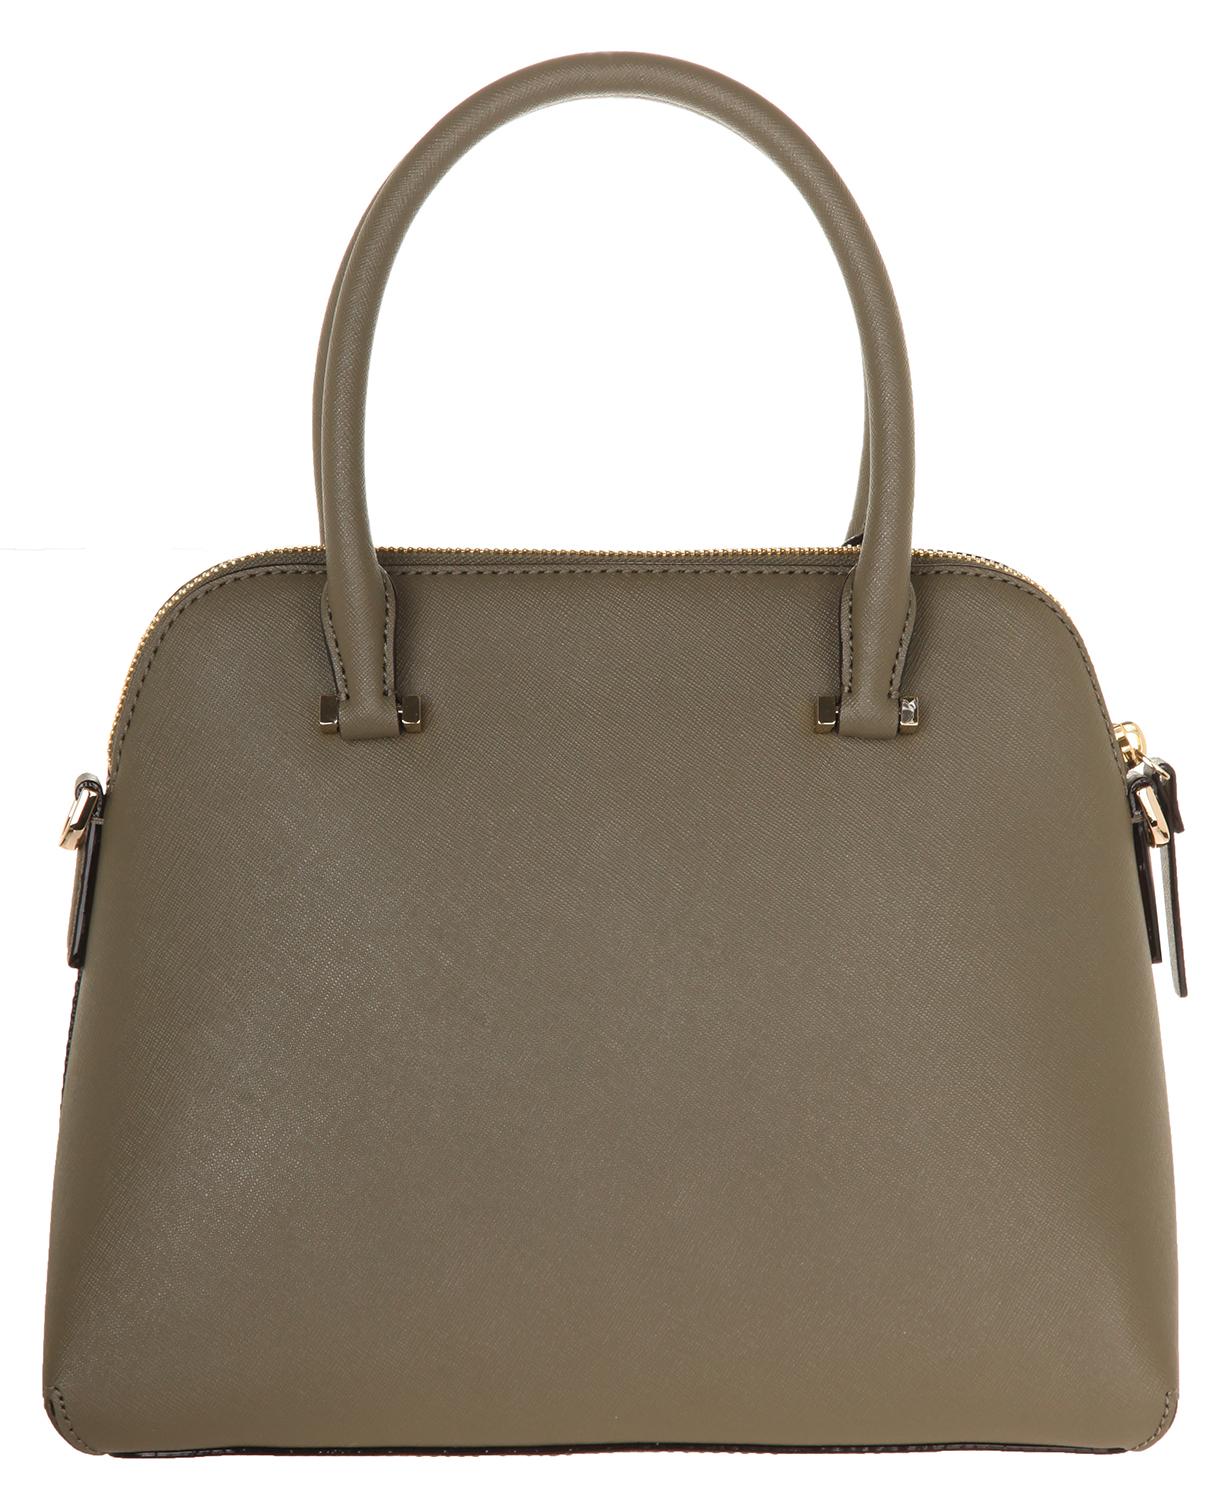 Item number PXRU7673-307 
Color olive
Exterior crosshatched leather
Lining 100% Polyester
Compartments: 1 main compartment, 1 zipper compartment, 2 slide compartments
Dimensions (width/height/depth) 28/23/10
Closure Zipper
Weight in grams approx